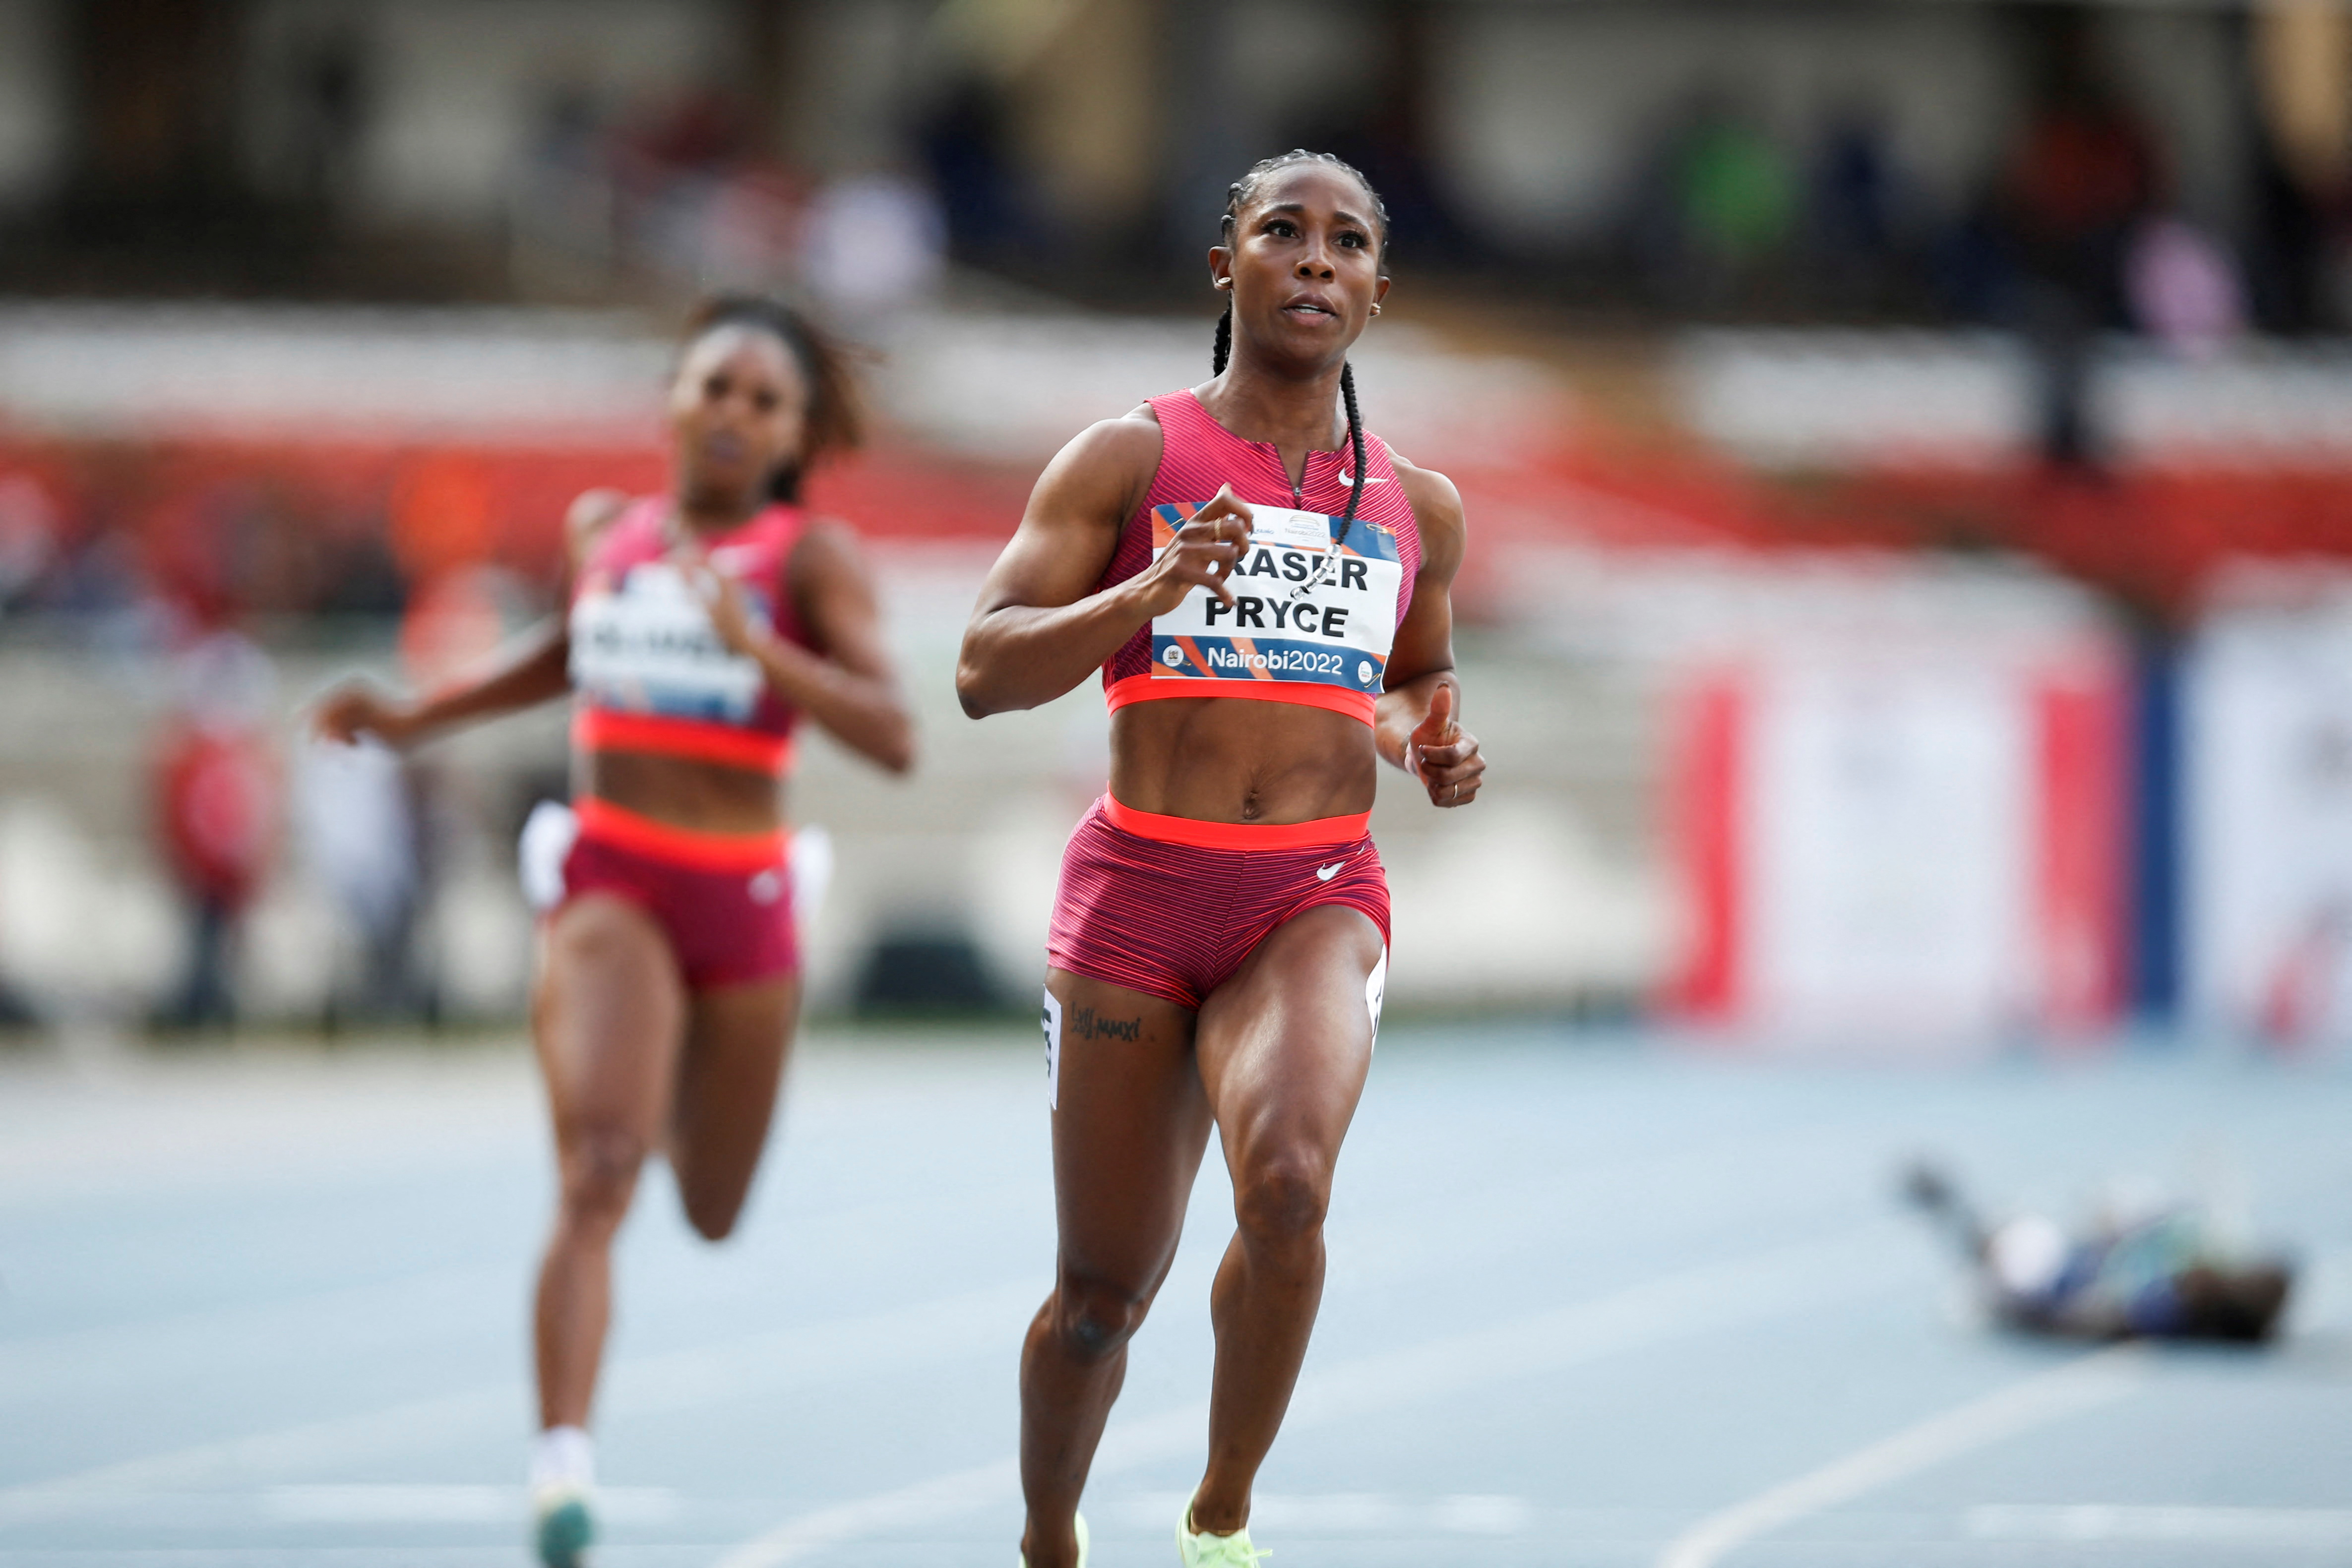 Jamaica's Shelly-Ann Fraser-Pryce competes in the women's 100 meters race during the third edition of Kip Keino Classic at the Kasarani stadium in Nairobi, Kenya May 7, 2022. REUTERS/Monicah Mwangi